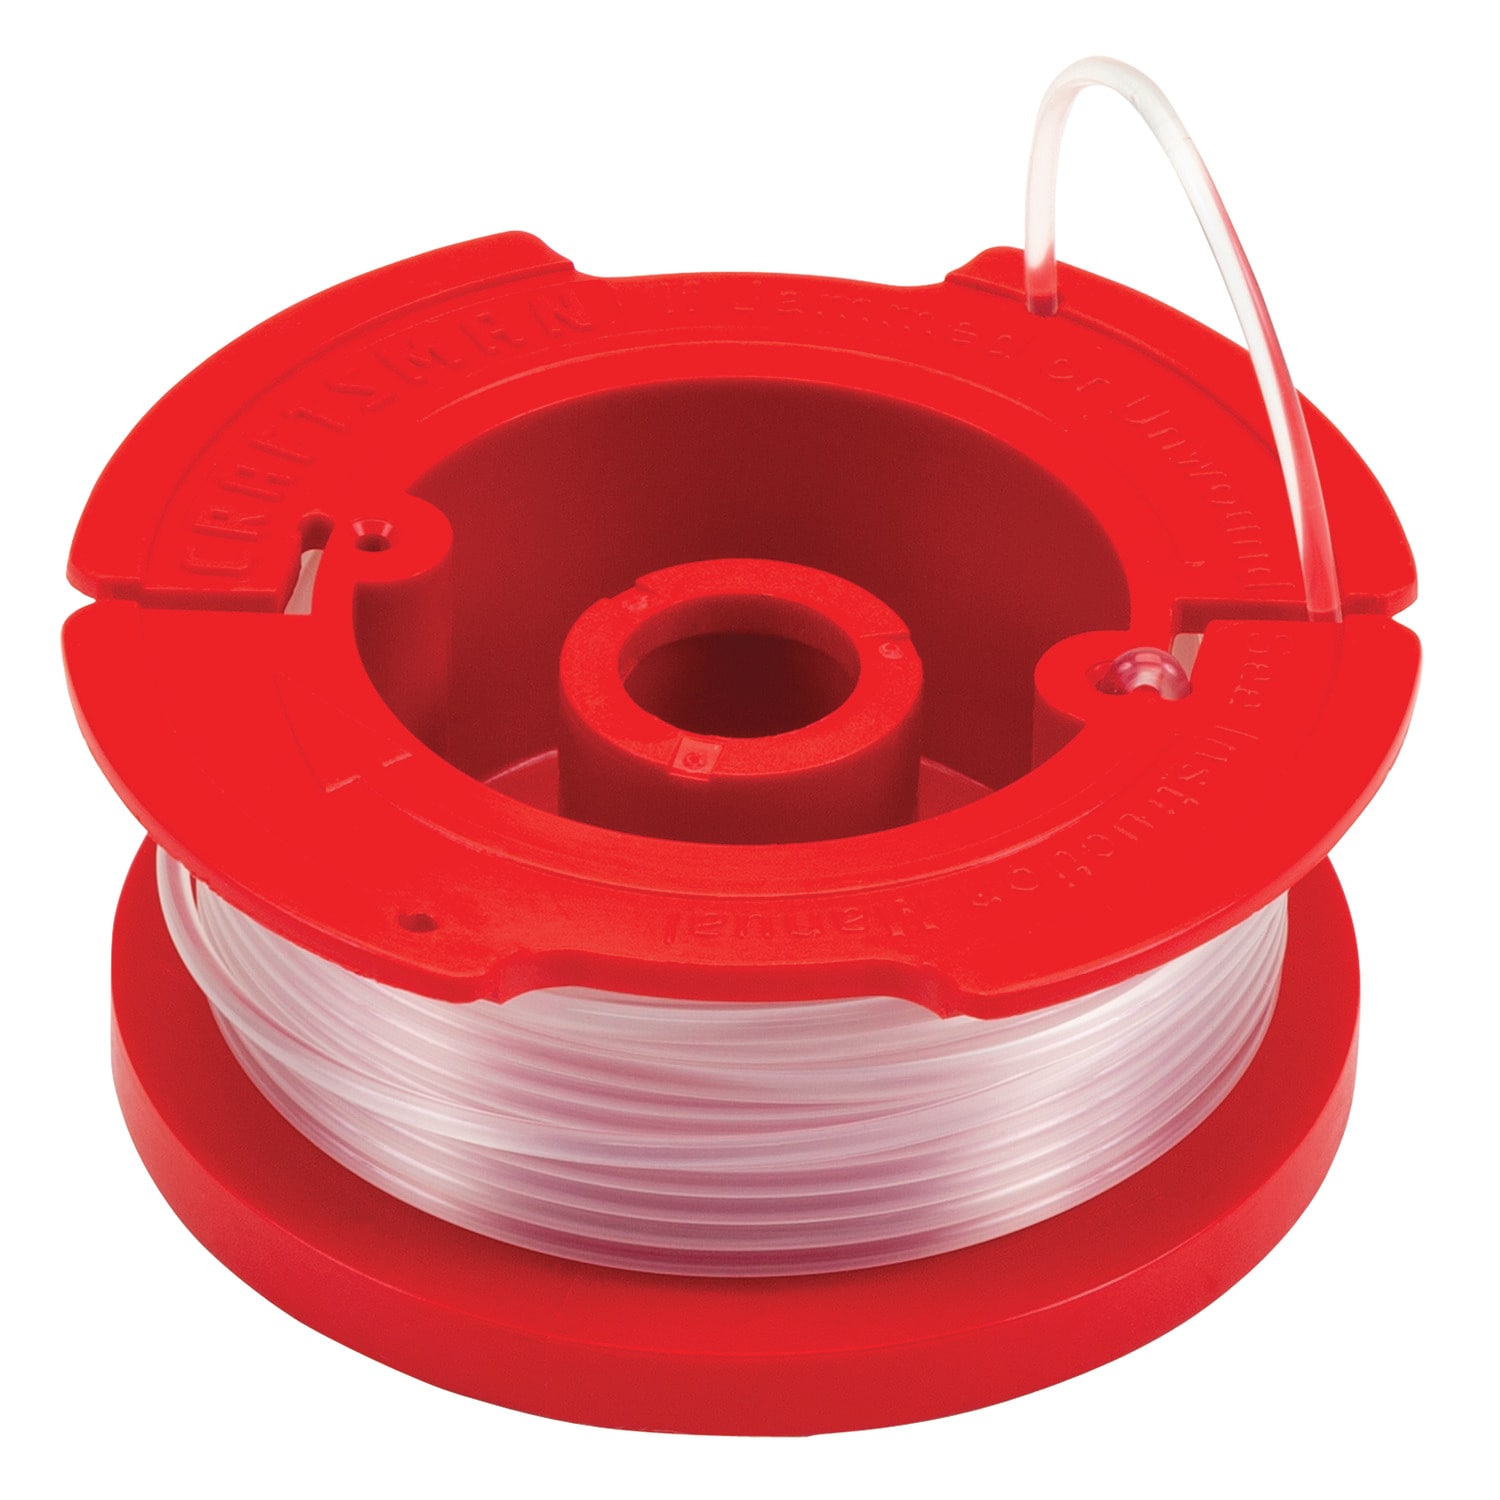 Craftsman CMZST0653 Replacement Spool and String, 30 Feet